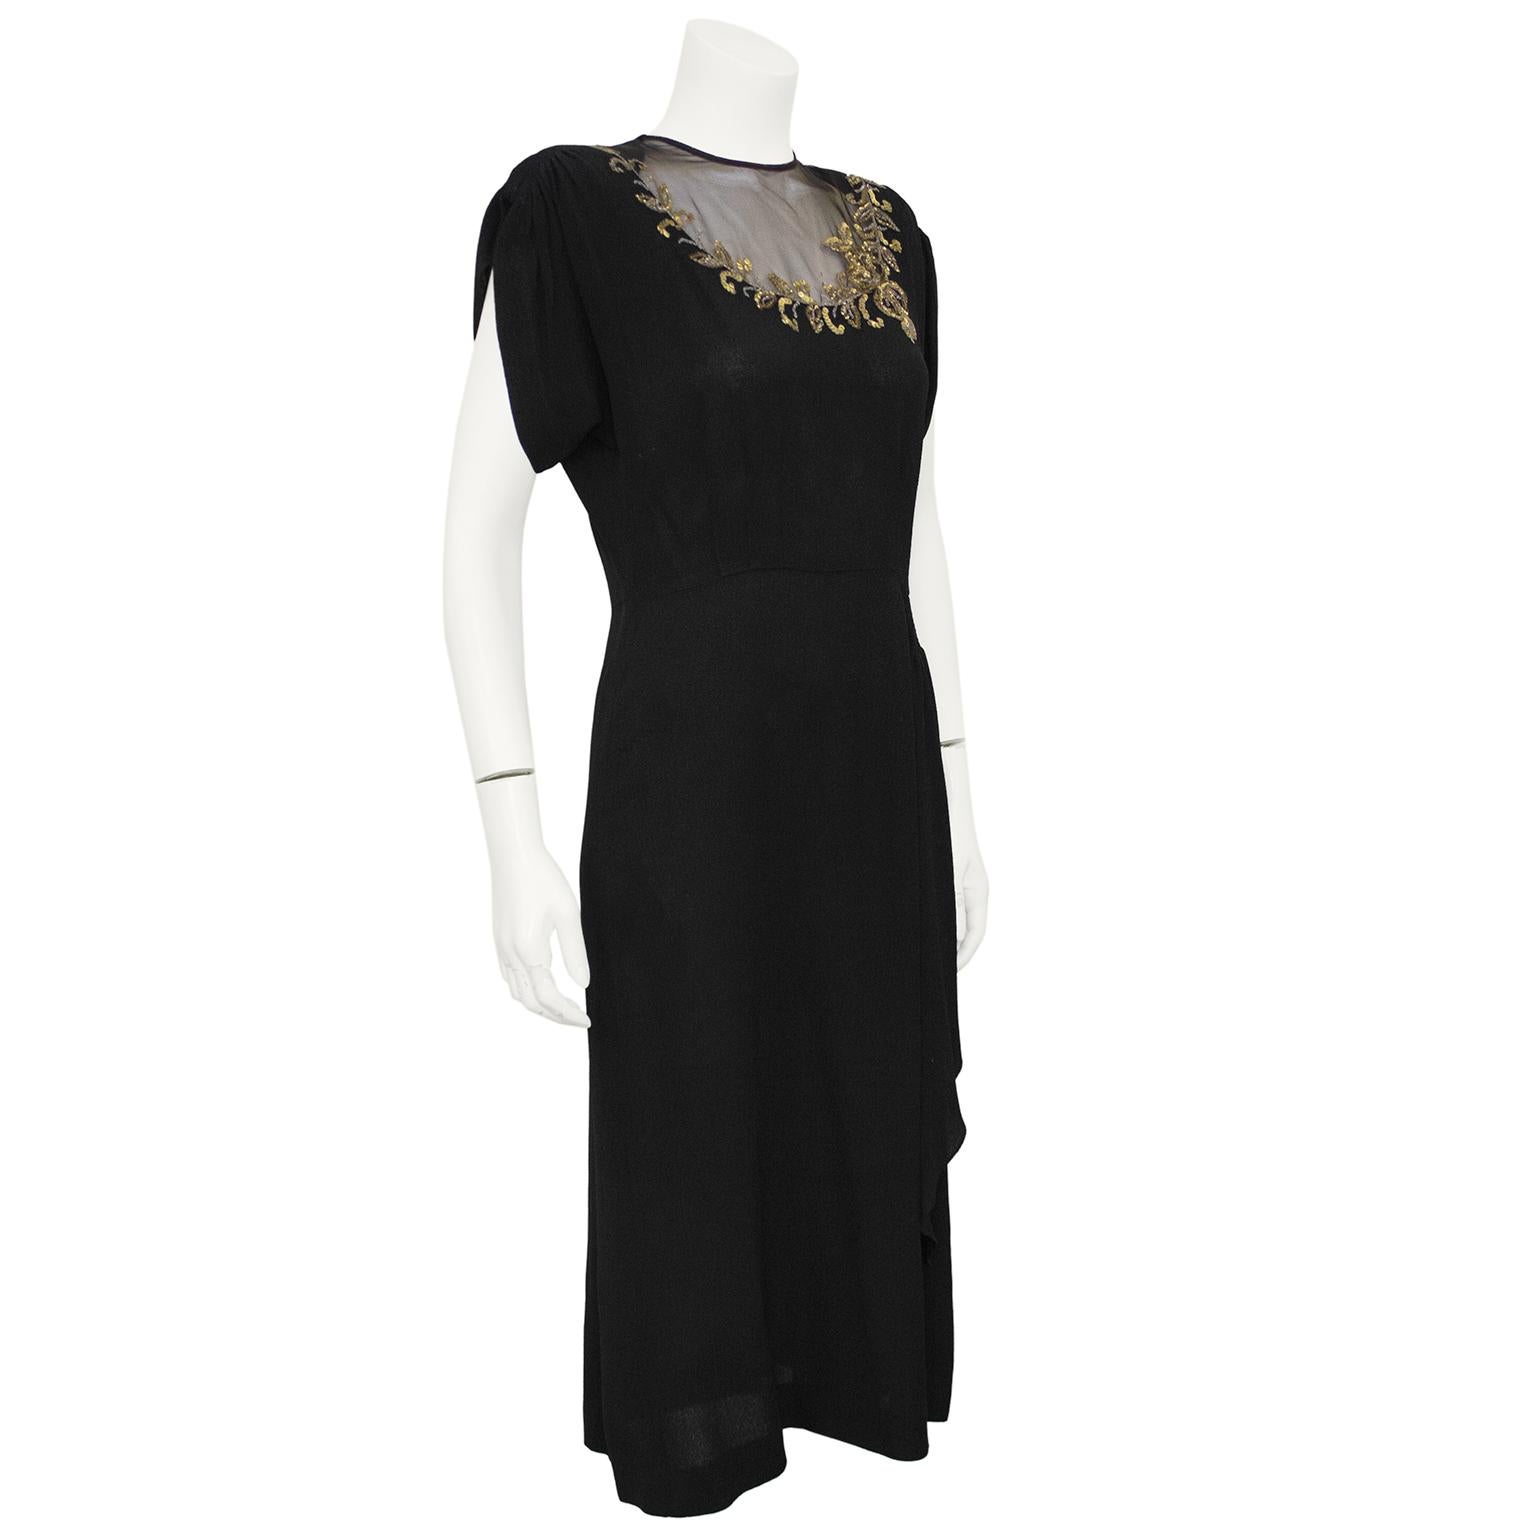 Beautiful 1940s black crepe dress with gold sequin applique. Shoulder pads help hold the shape of the top gathered sleeve and a hip drape detail adds dimension to the silhouette along with vertical darts at the waist. The beautifully constructed